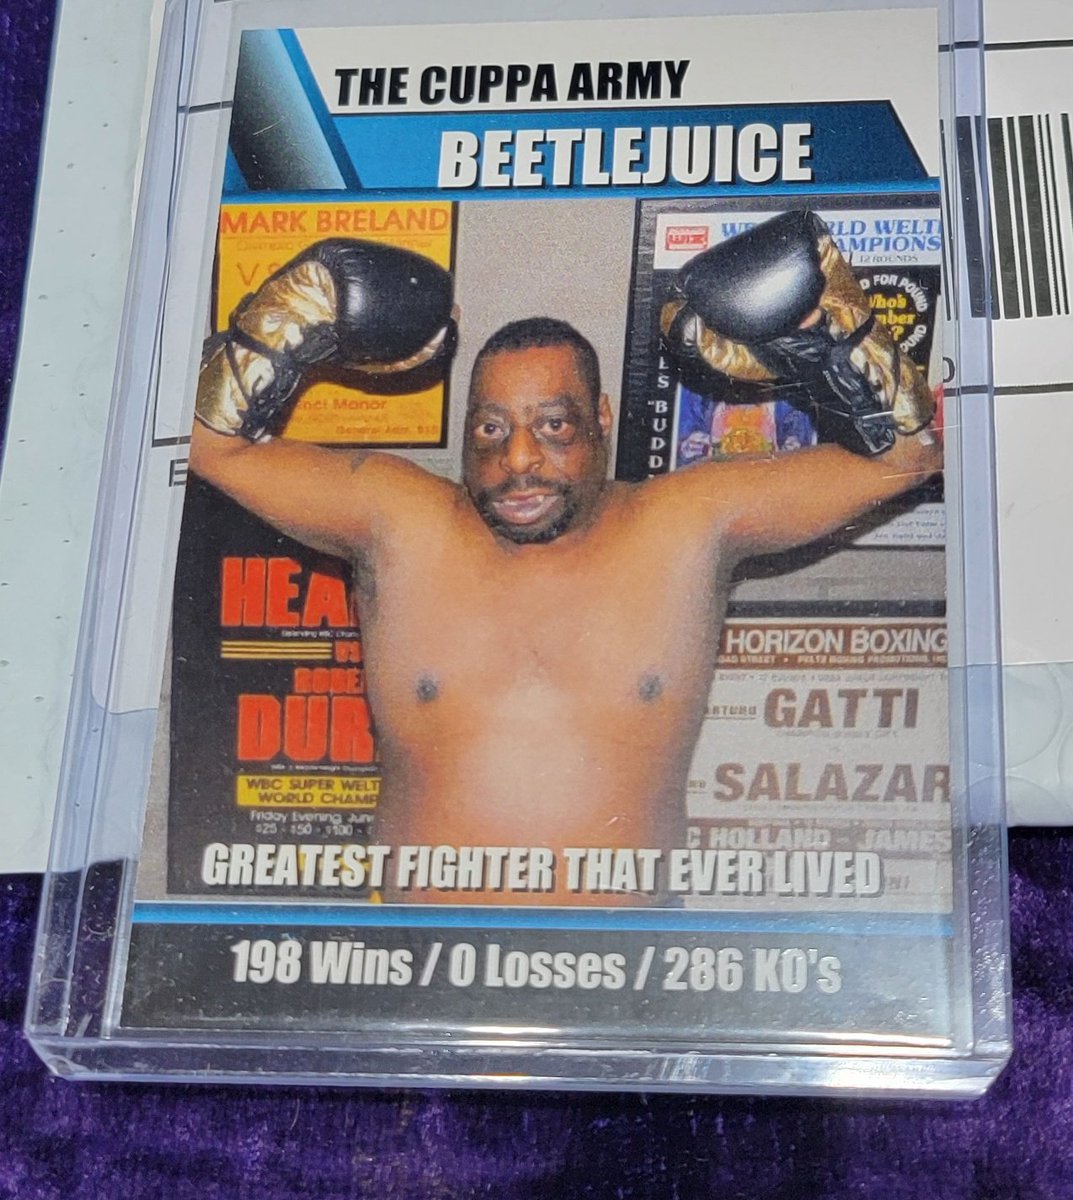 Jeff Jarrett beat him up so this counts!! One of the greatest autograph cards that exist!   BEETLEJUICE!! #wrestling #wwe #thehobby #wrestlingcards #wrestlingcardwednesday #WWE #AEW #wcw #TNA #NJPW #ROH #WrestlingCommunity #wrestlingtradingcards #wrestlingautographs @HowardStern…